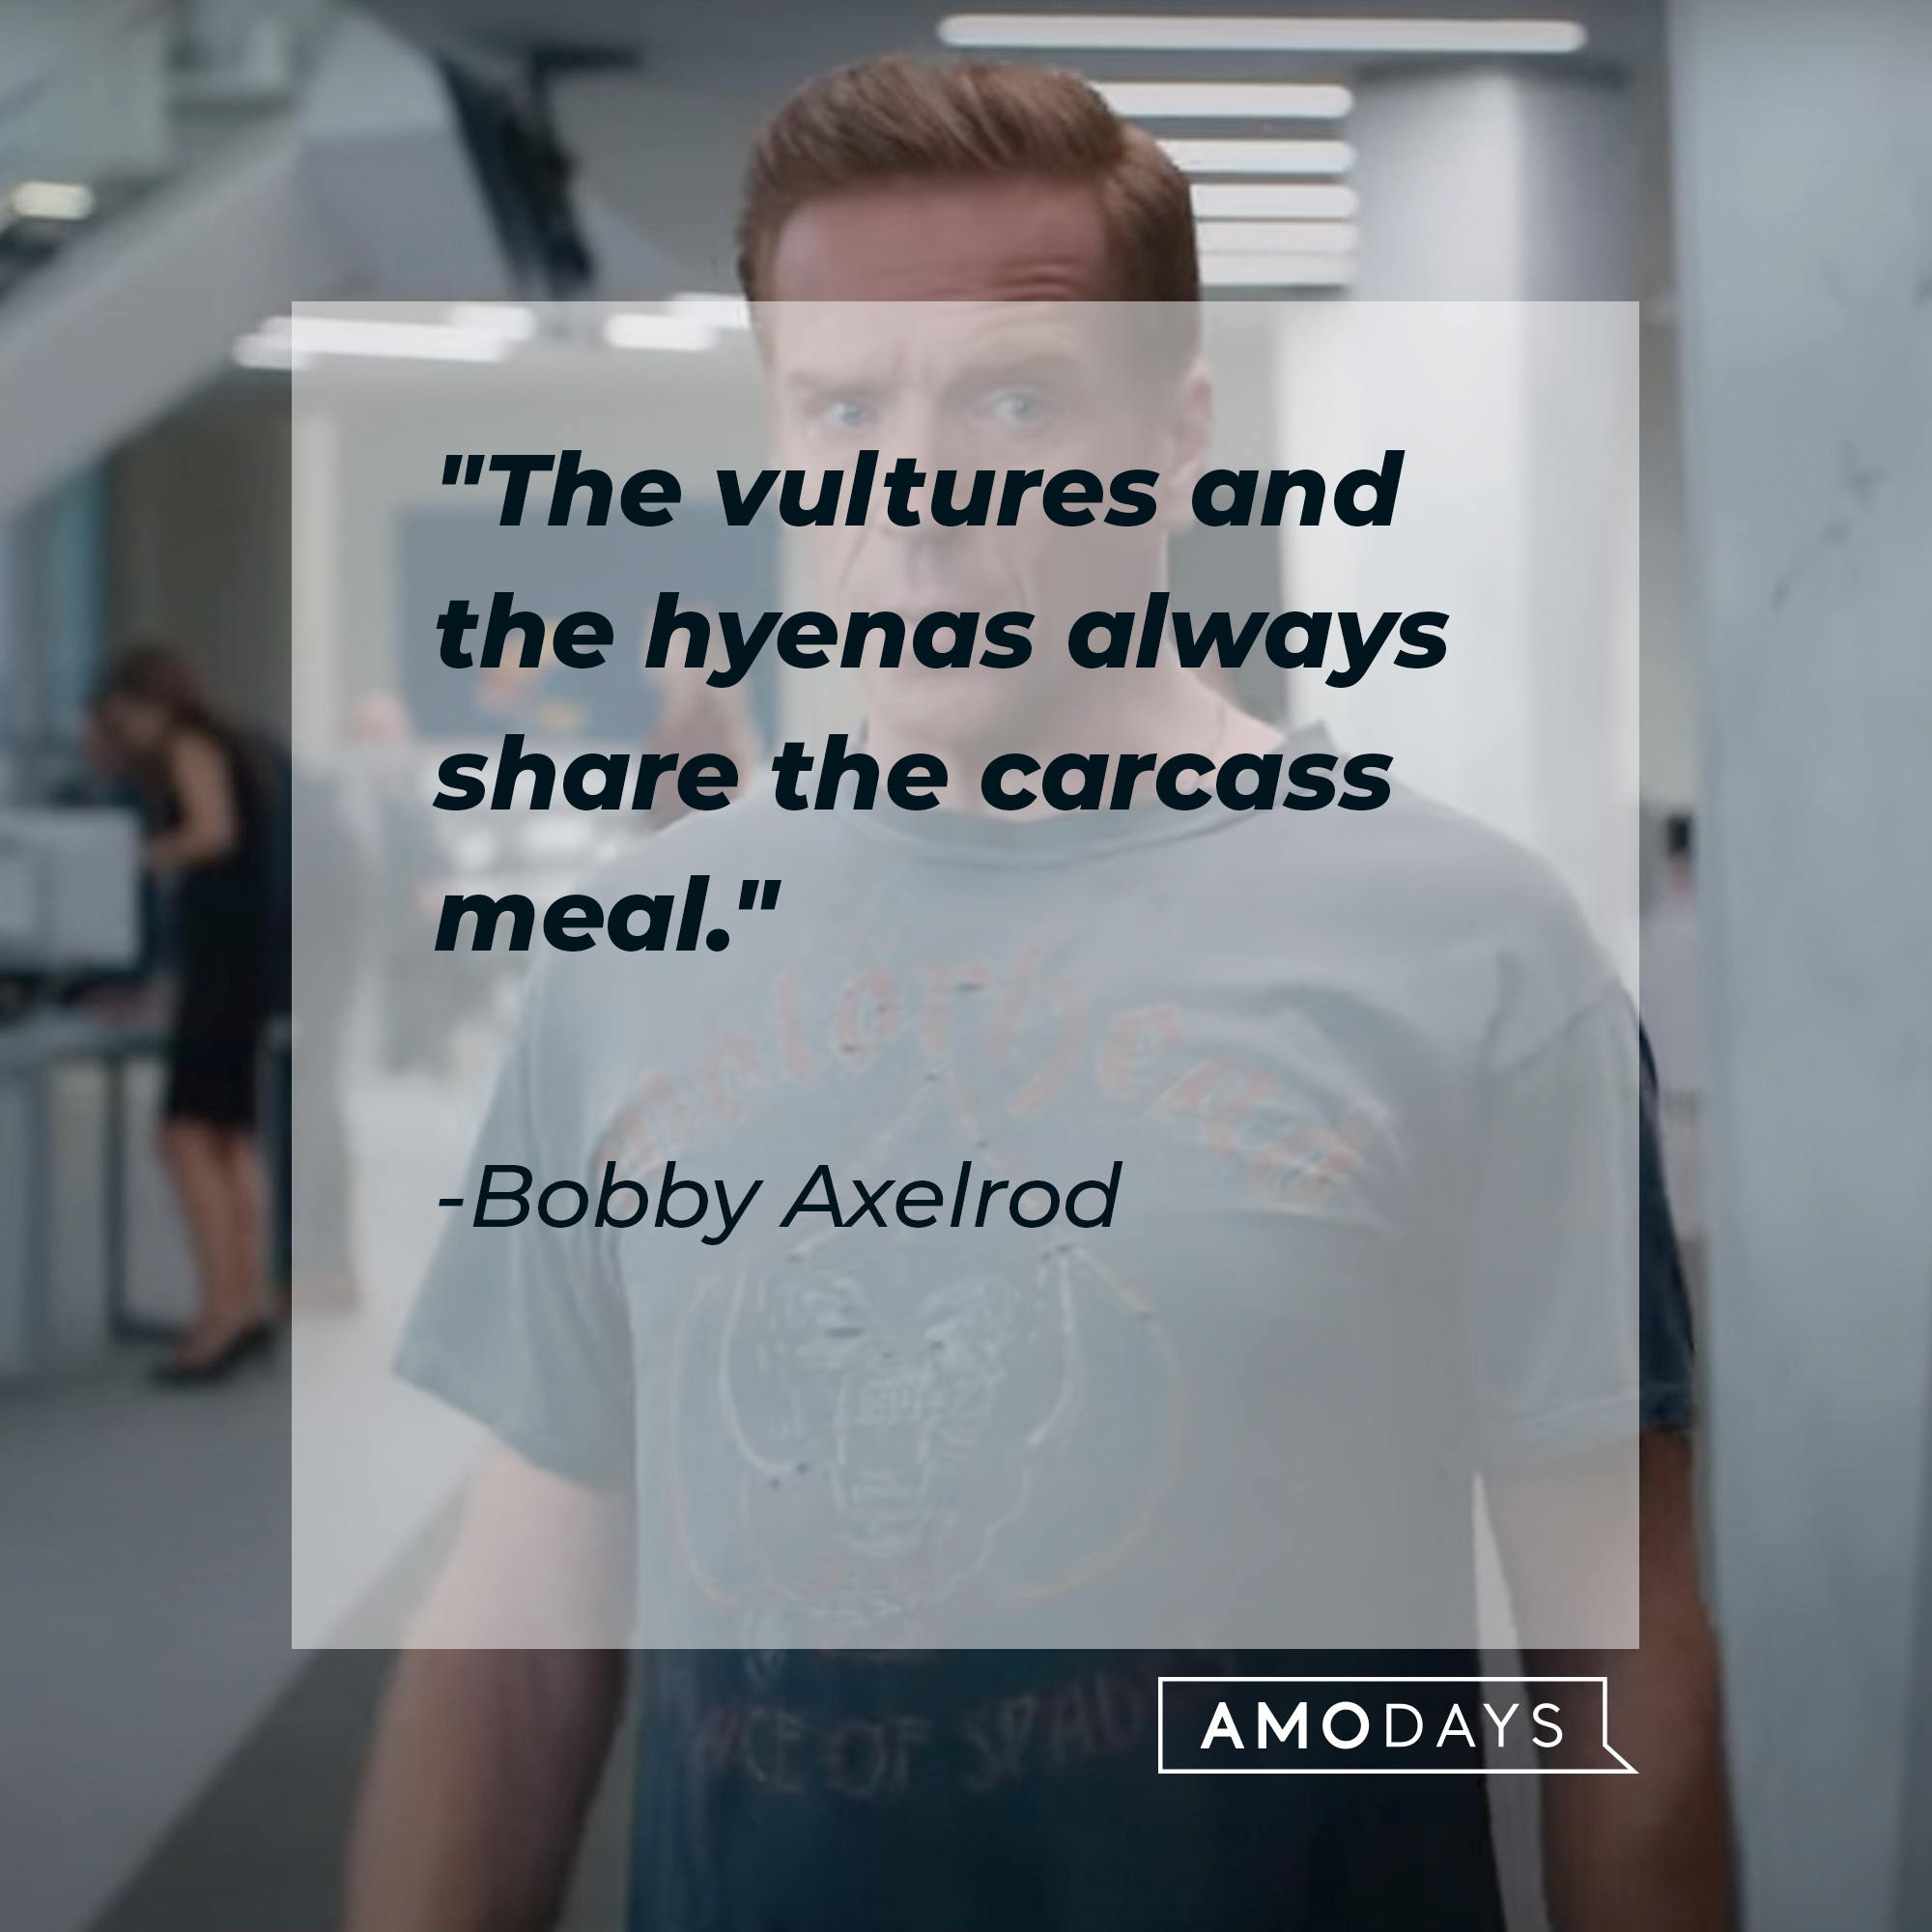 Bobby Axelrod's quote: "The vultures and the hyenas always share the carcass meal." | Source: Youtube.com/BillionsOnShowtime